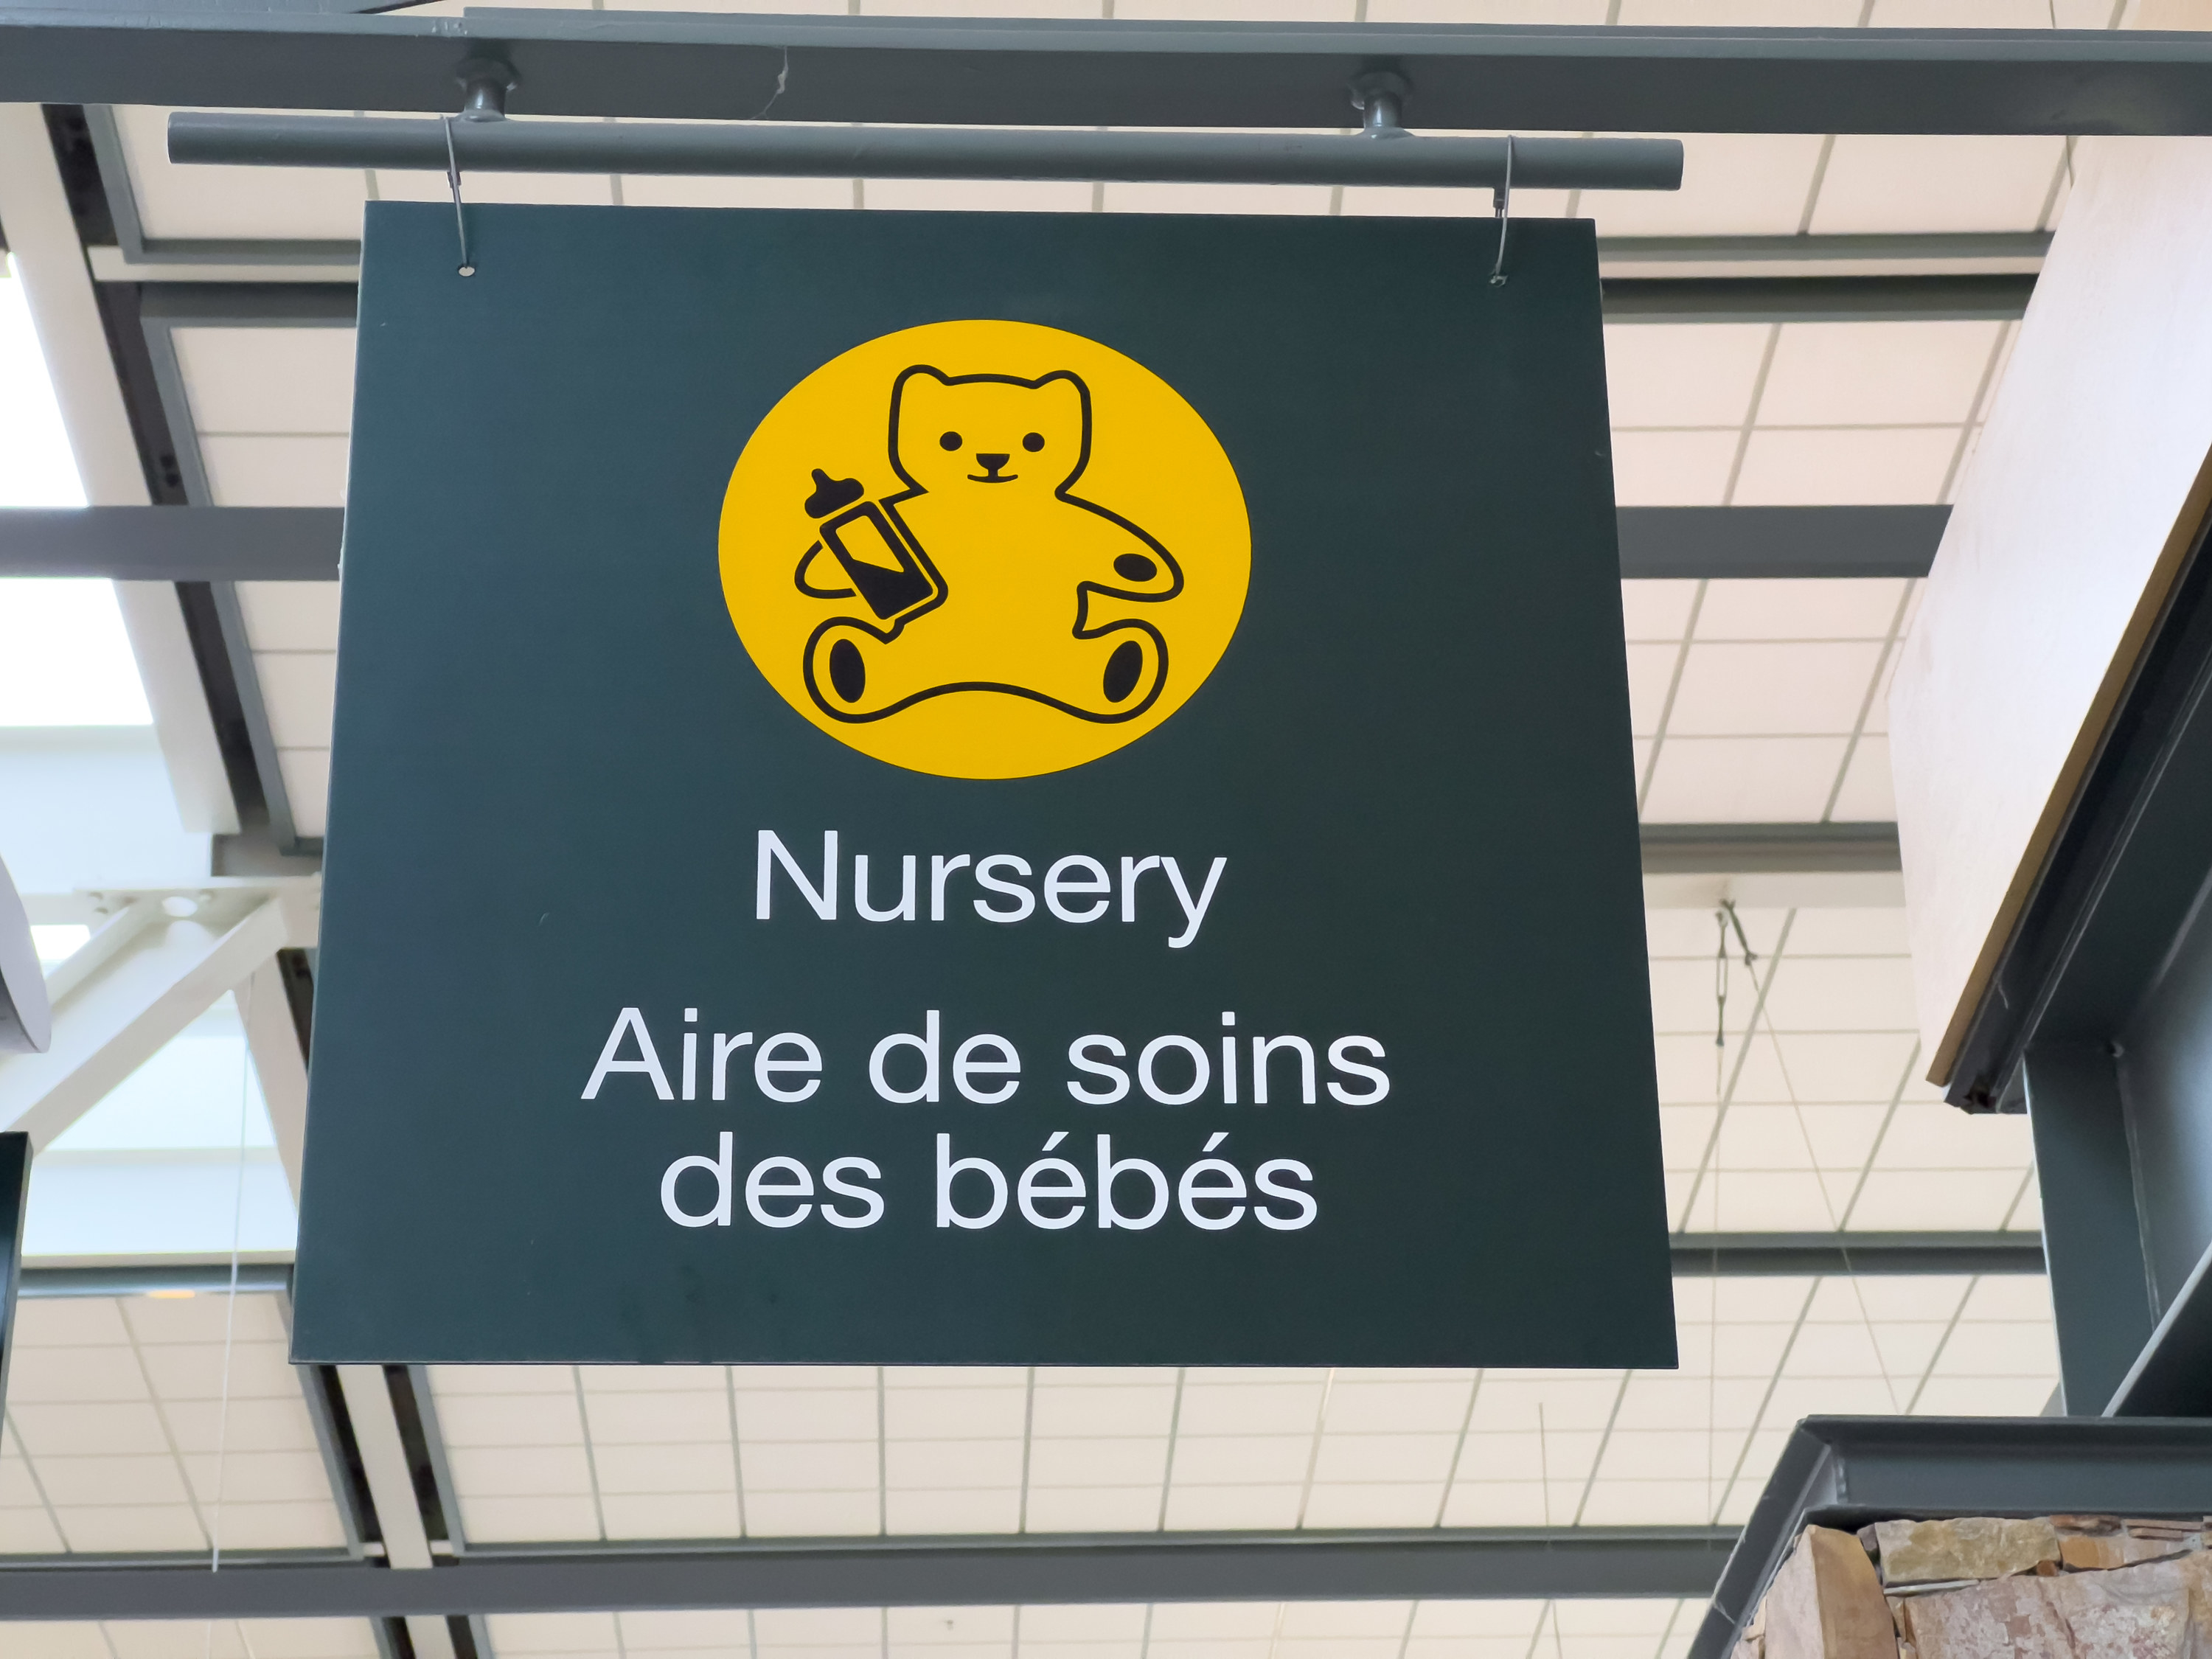 Sign for a nursery room in an airport